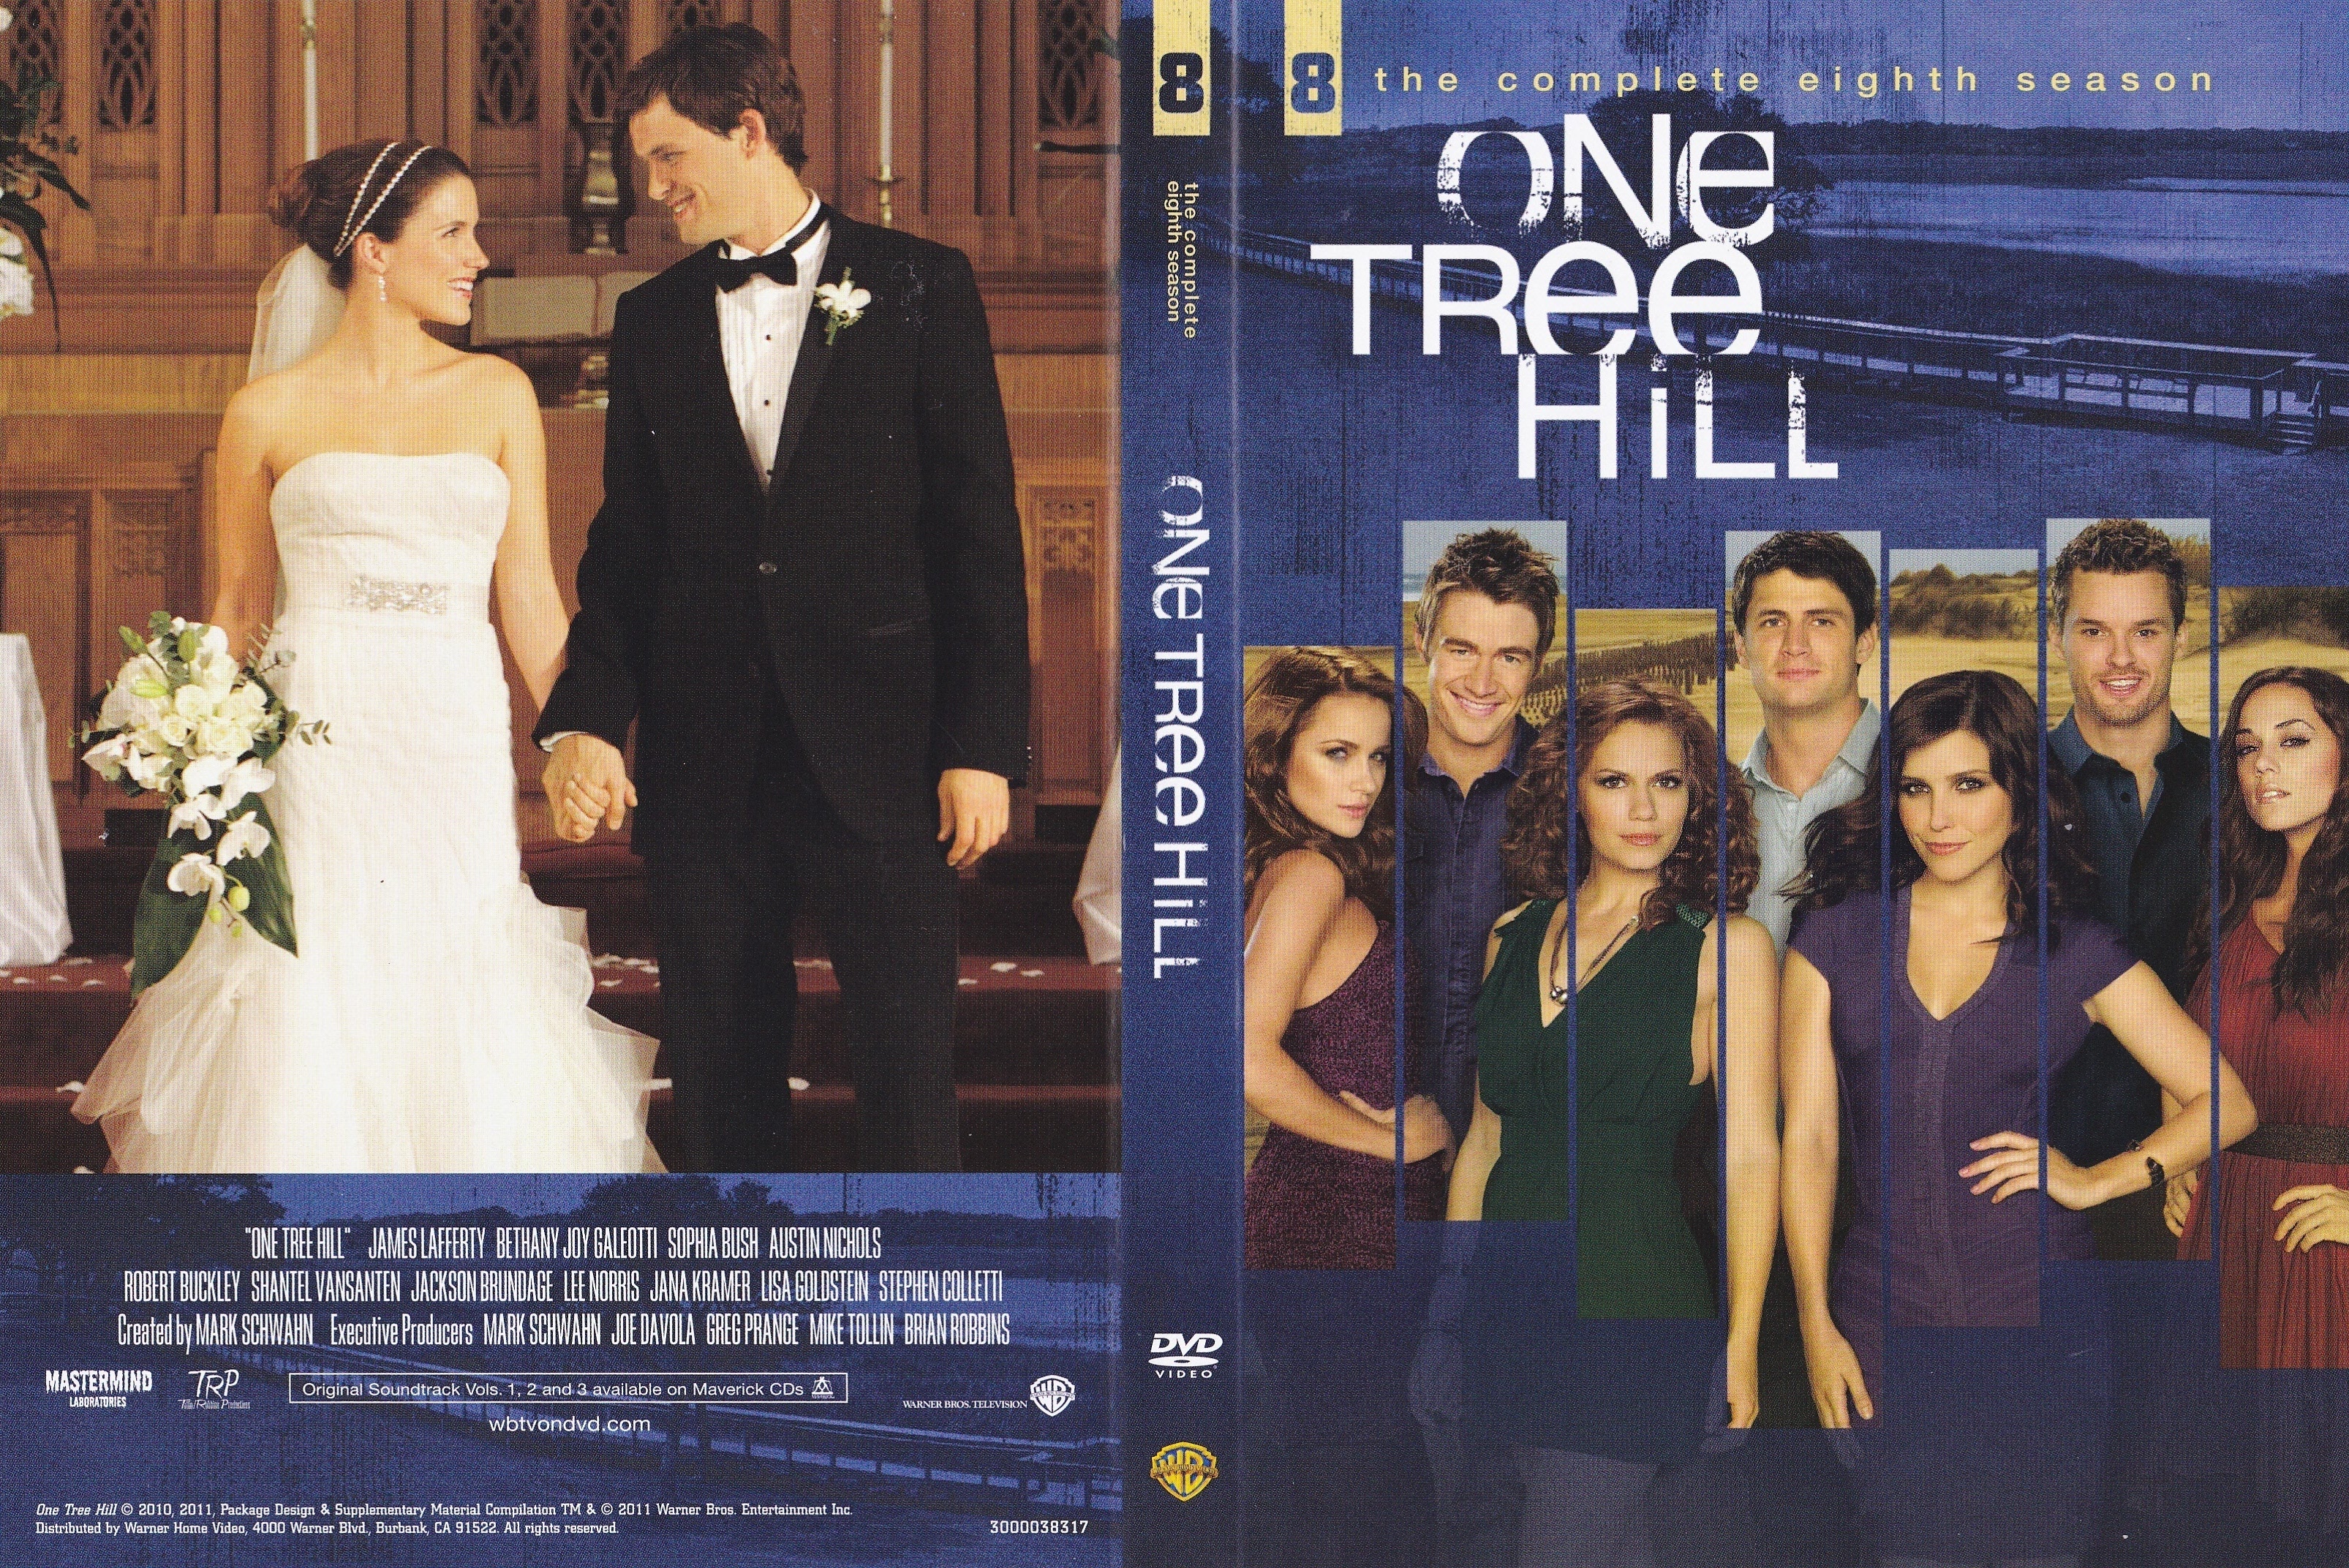 Jaquette DVD One tree hill Saison 8 (Canadienne)